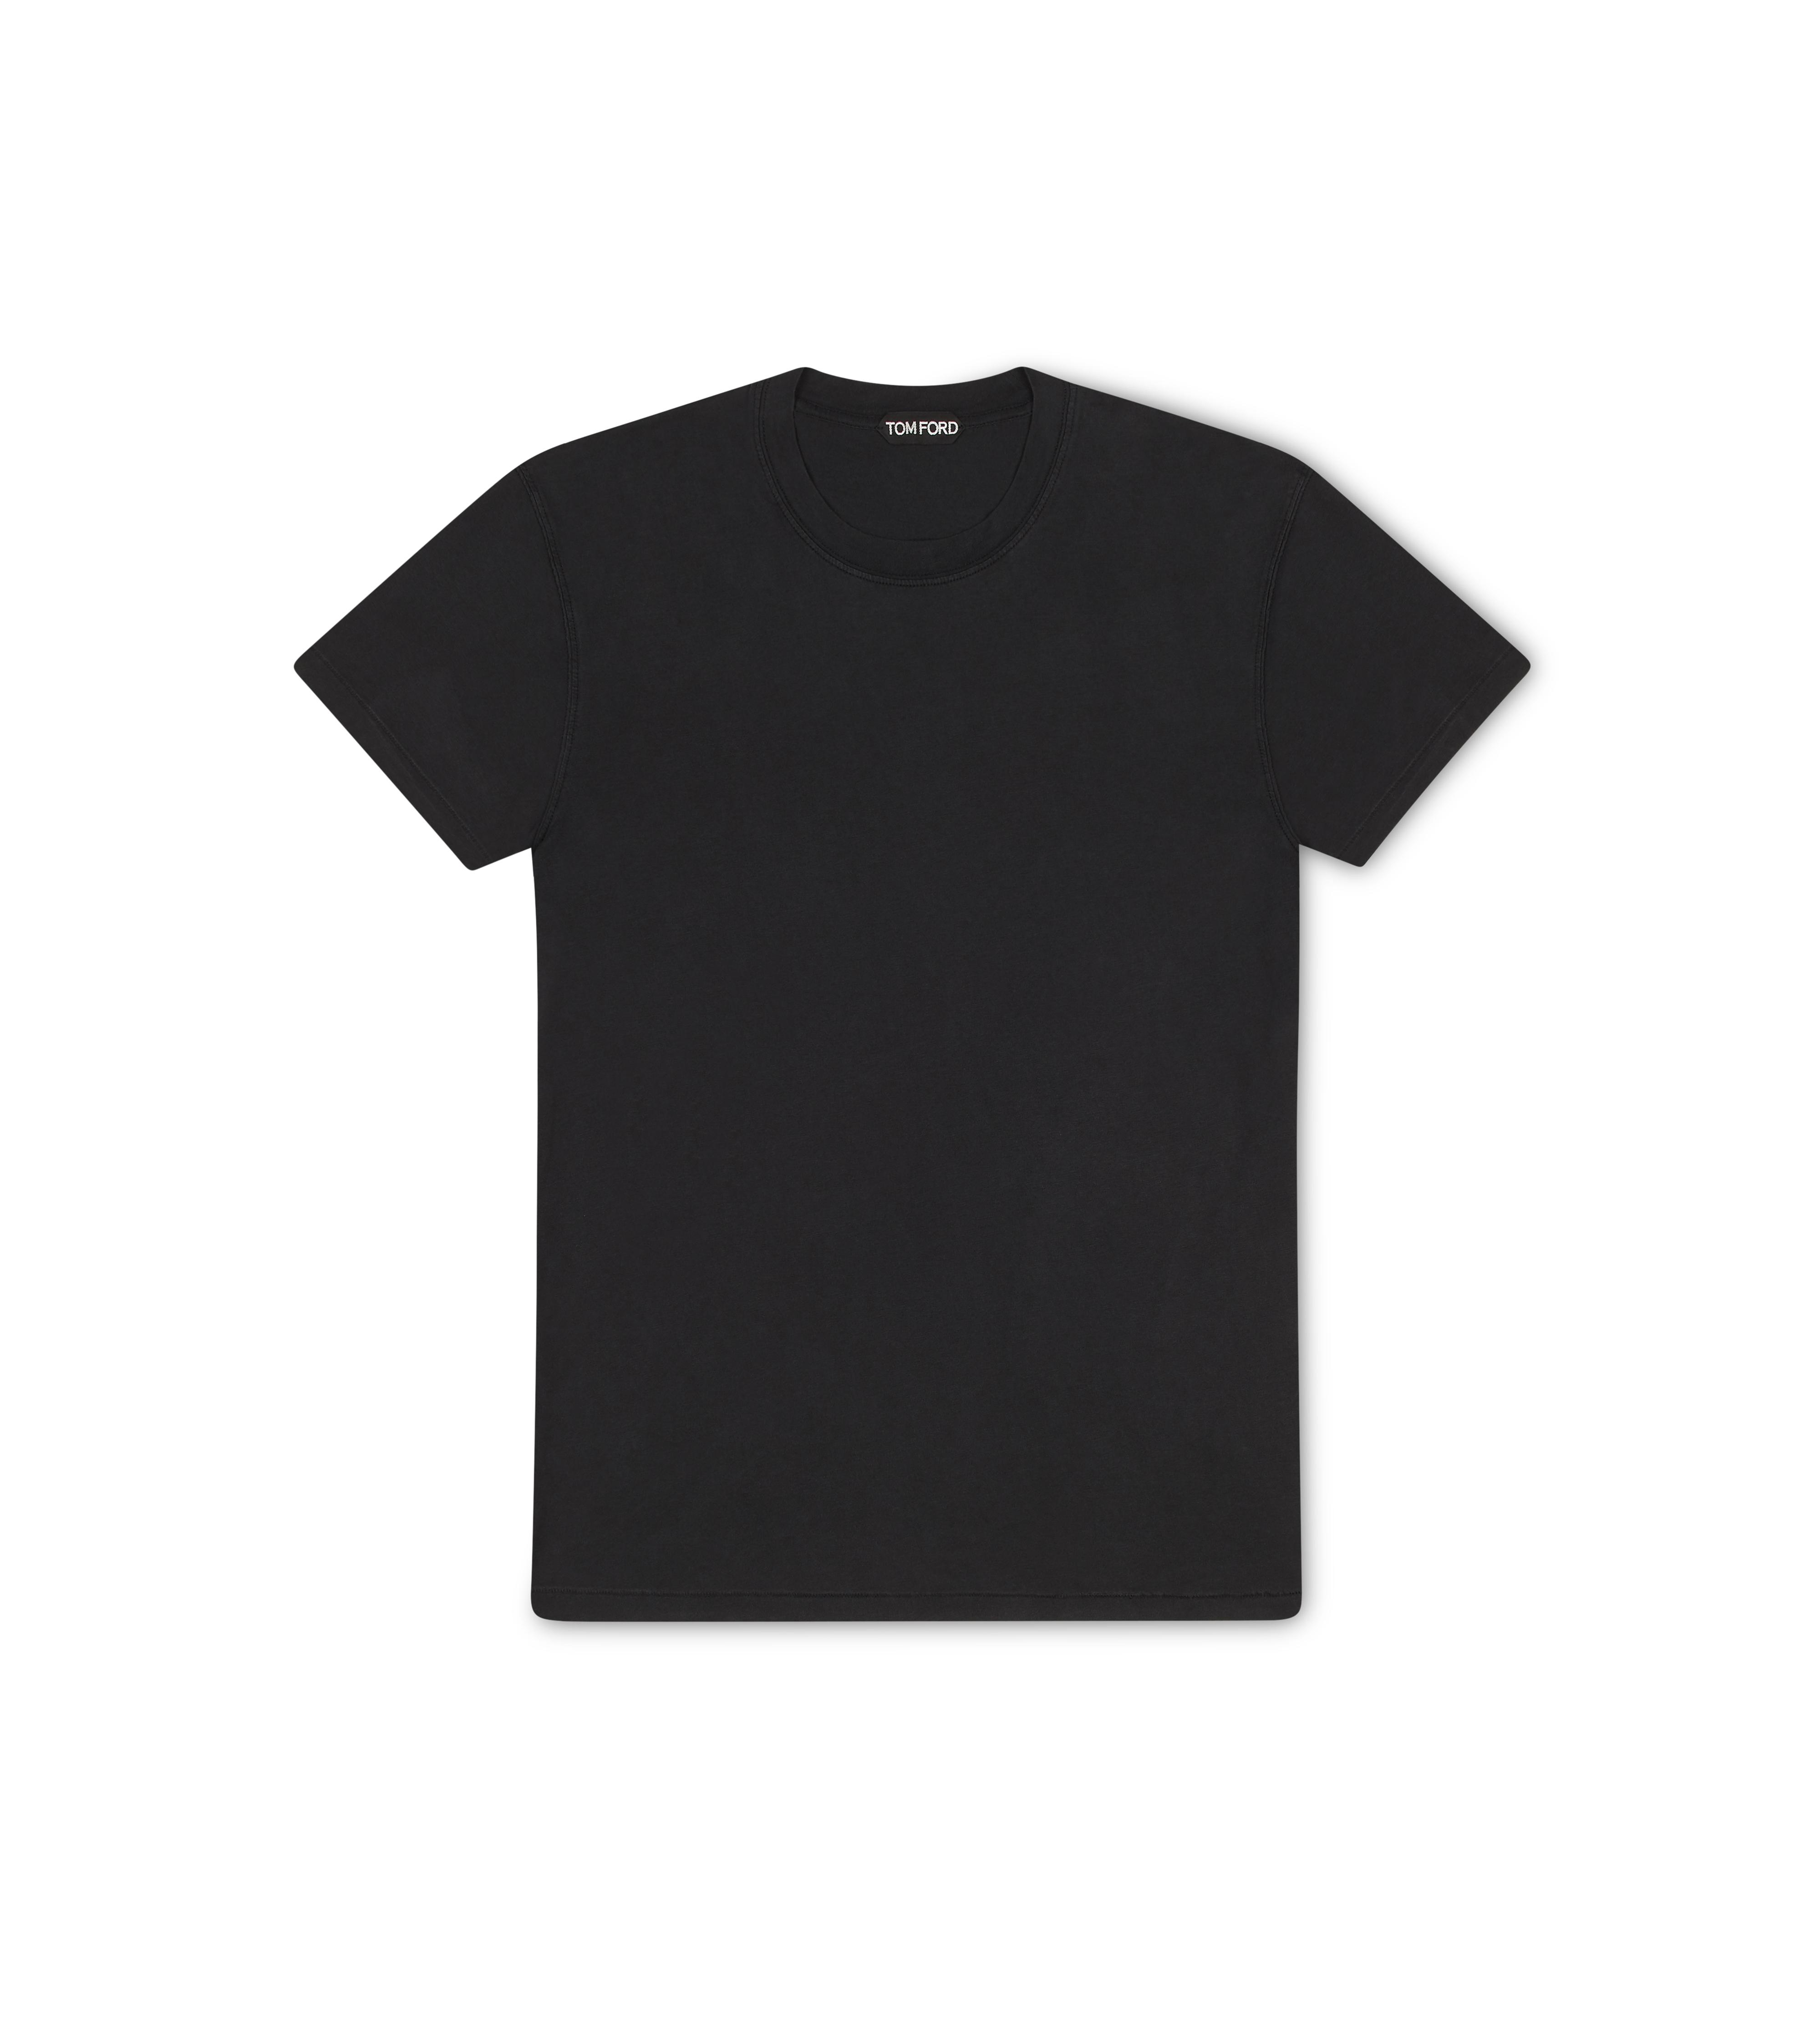 tom ford jersey shirt